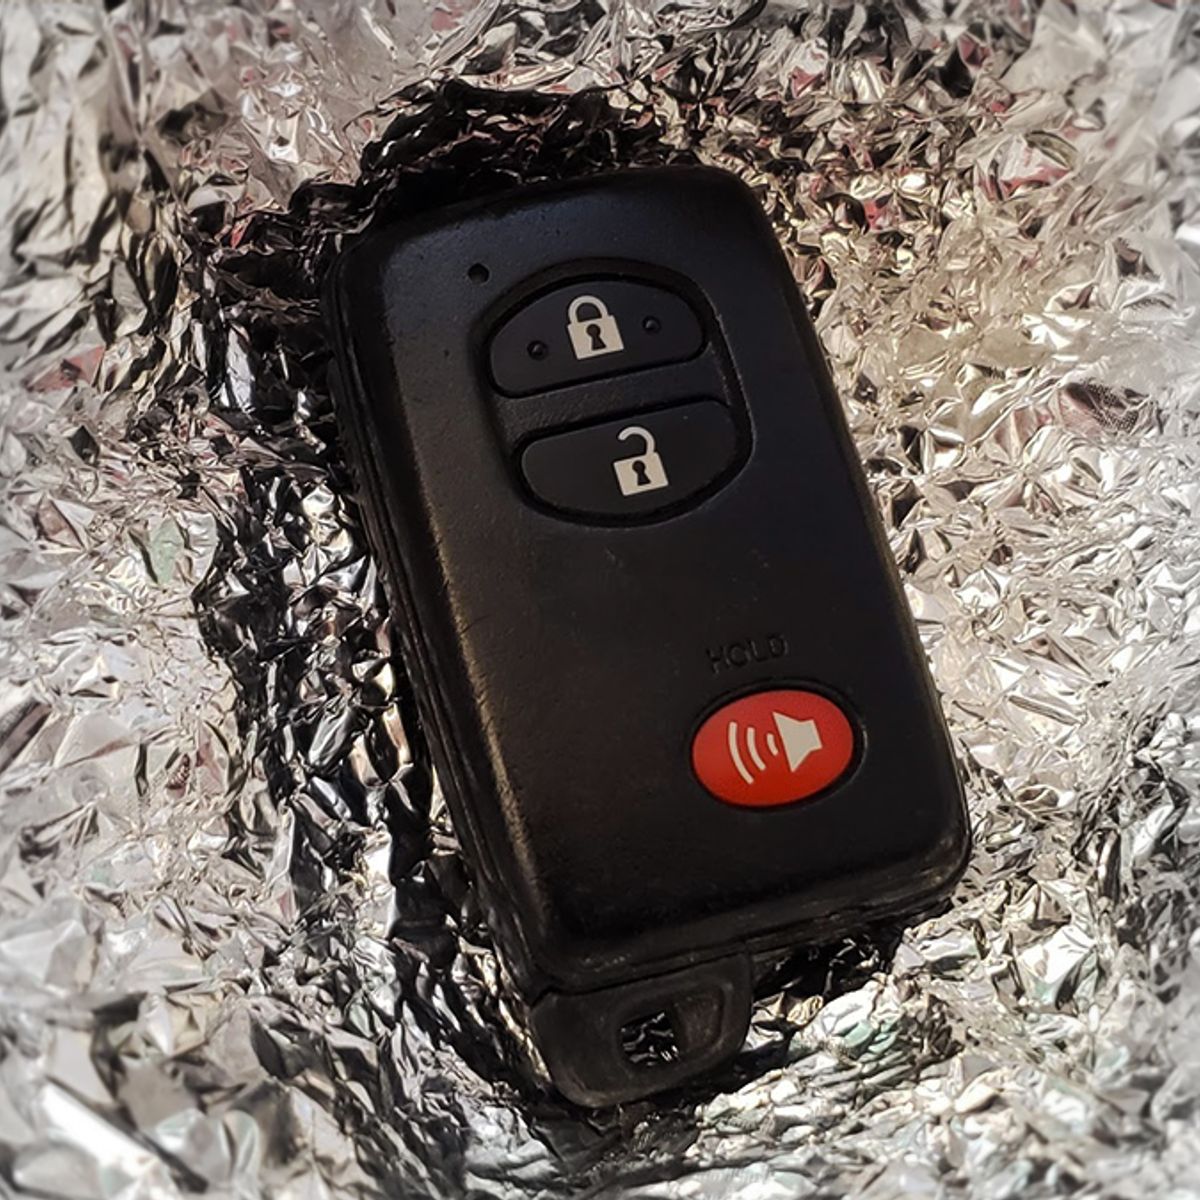 Why you should keep your car keys in a metal coffee can